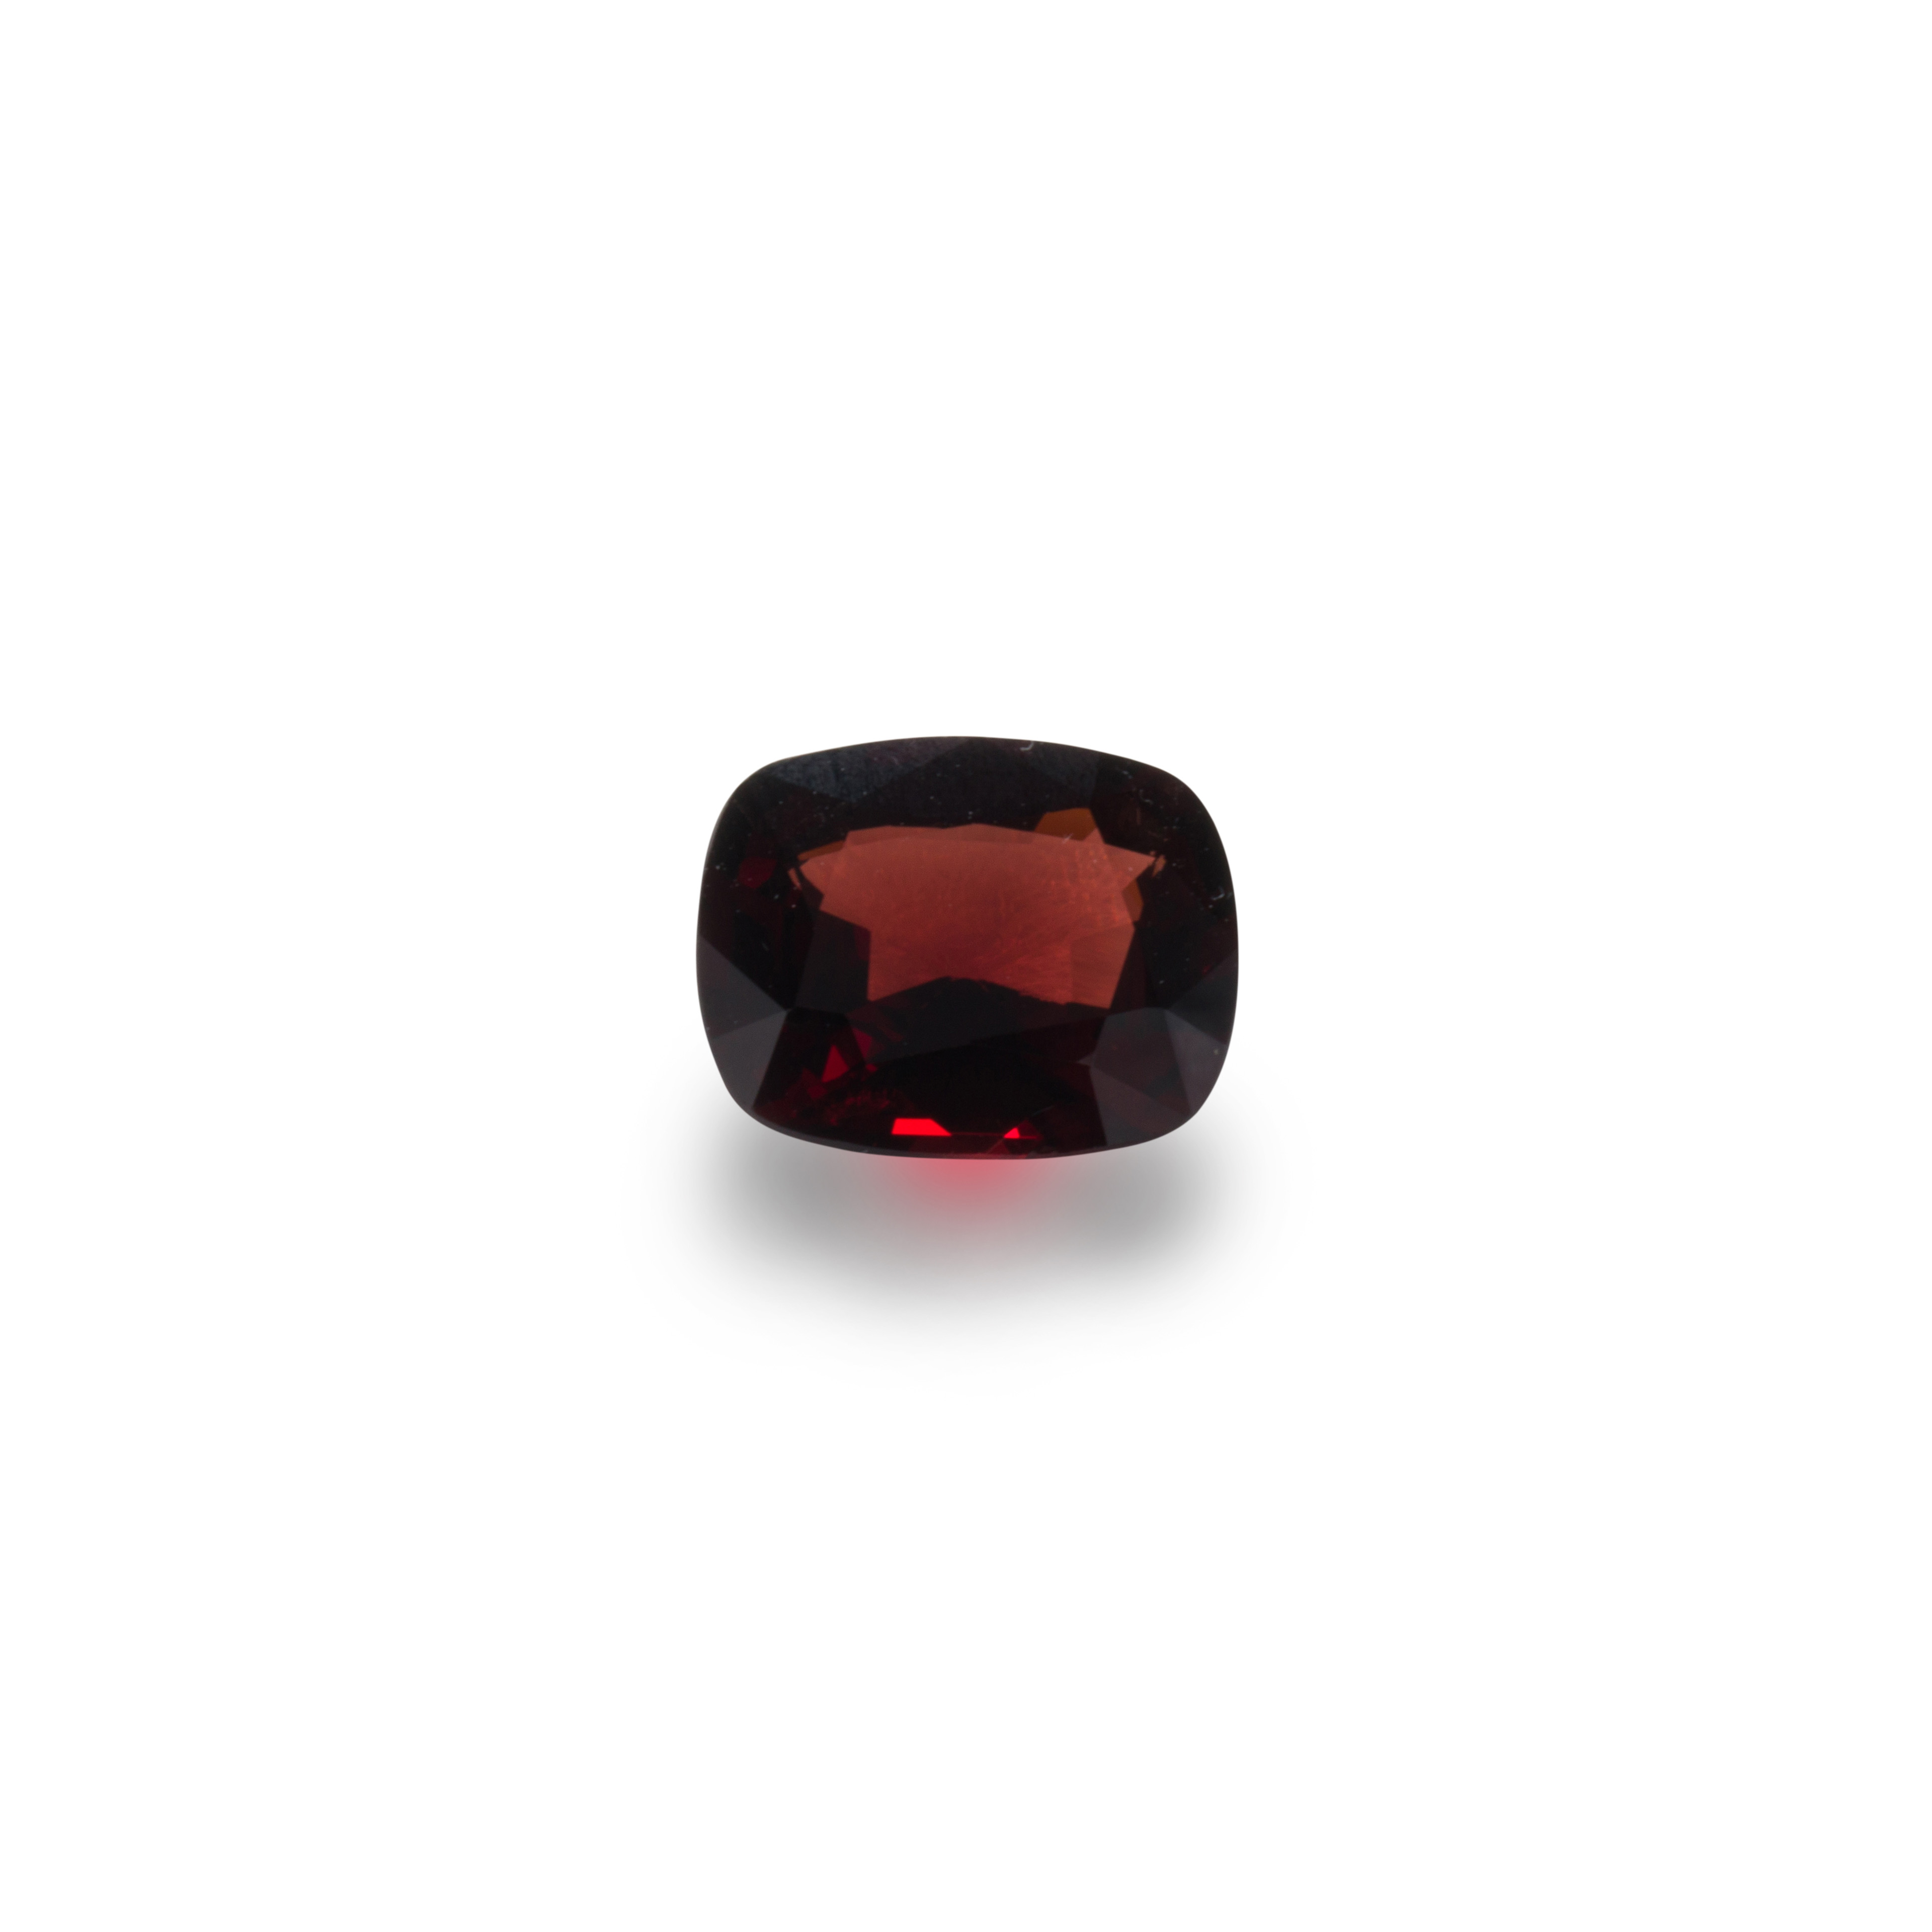 AN UNMOUNTED RED SPINEL An unmounted